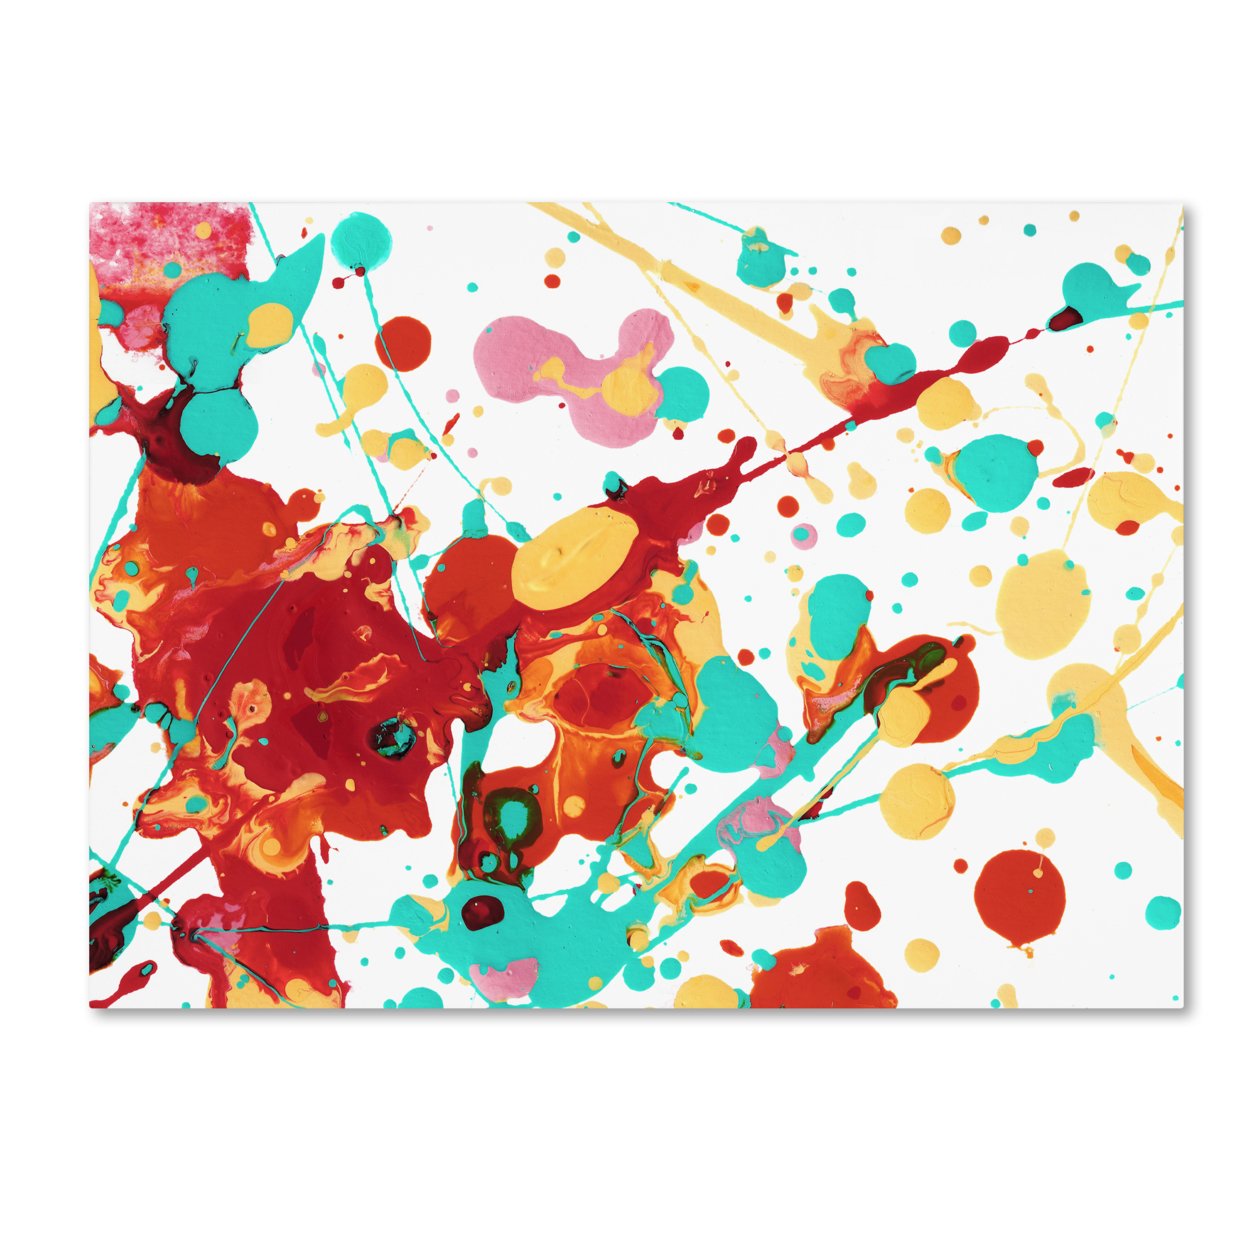 Amy Vangsgard 'Paint Party 2' Canvas Wall Art 35 X 47 Inches